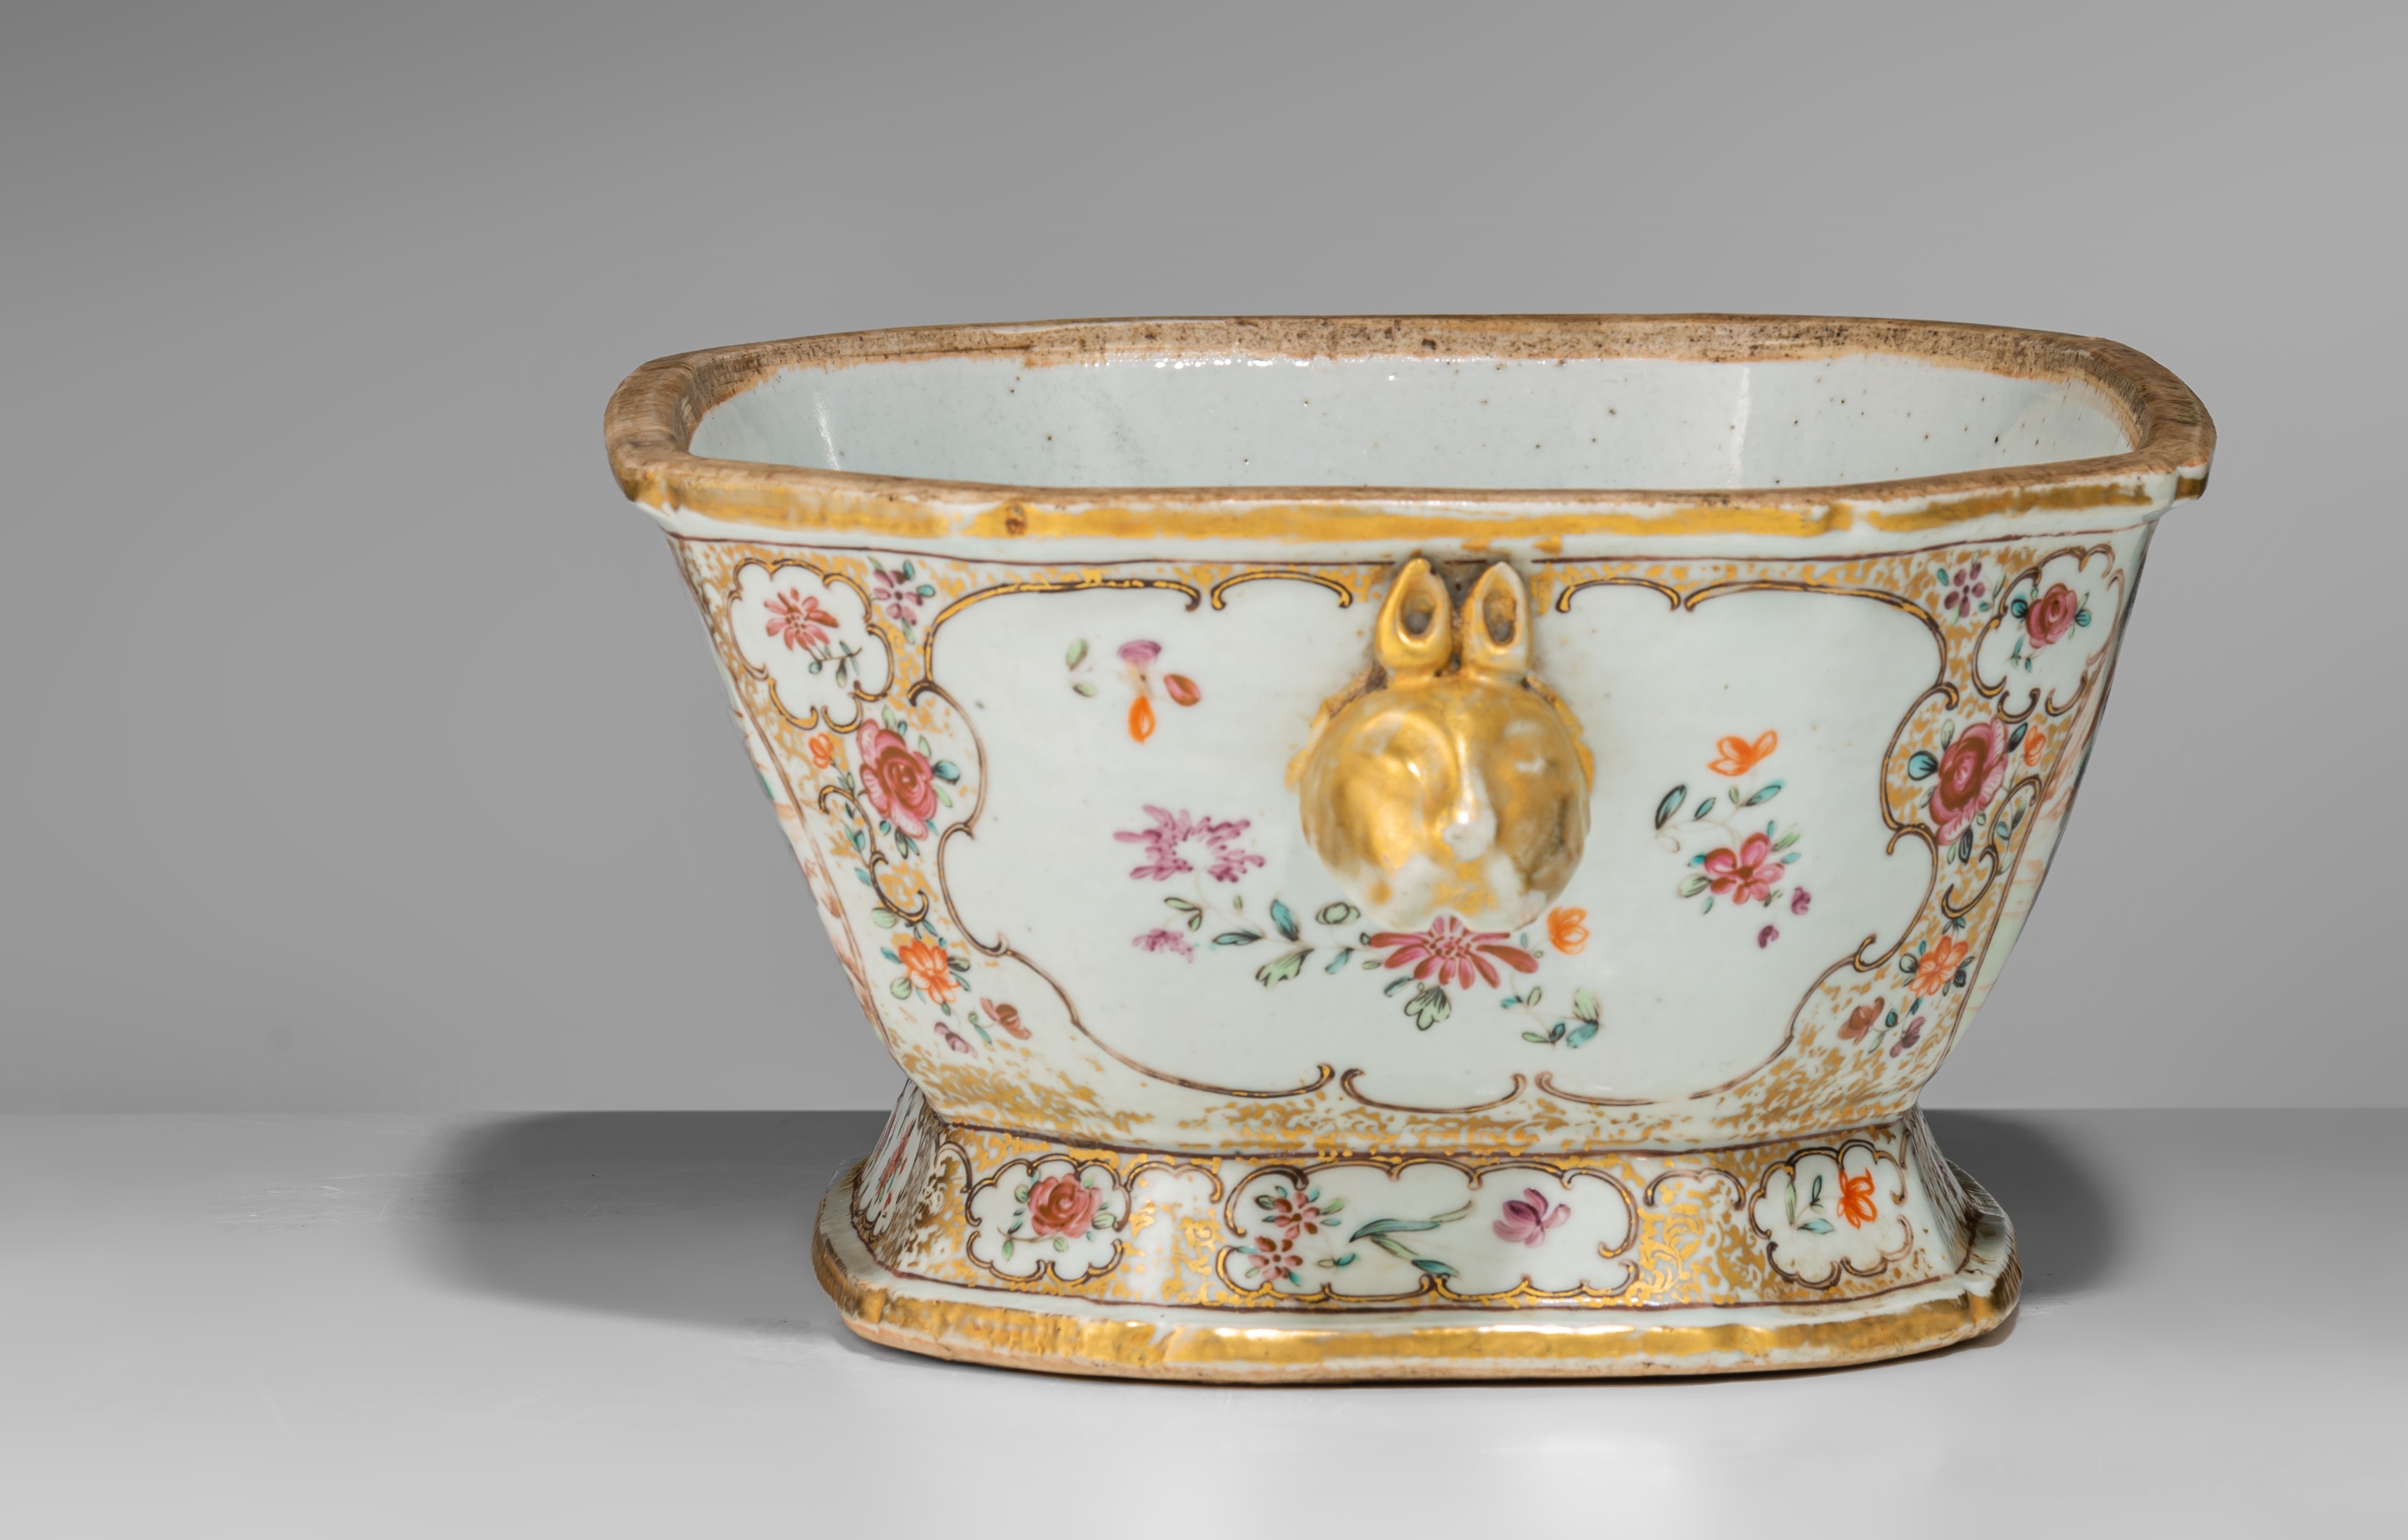 A collection of famille rose and gilt decorated export porcelain ware, 18thC, largest - H 12,5 - 34, - Image 11 of 20